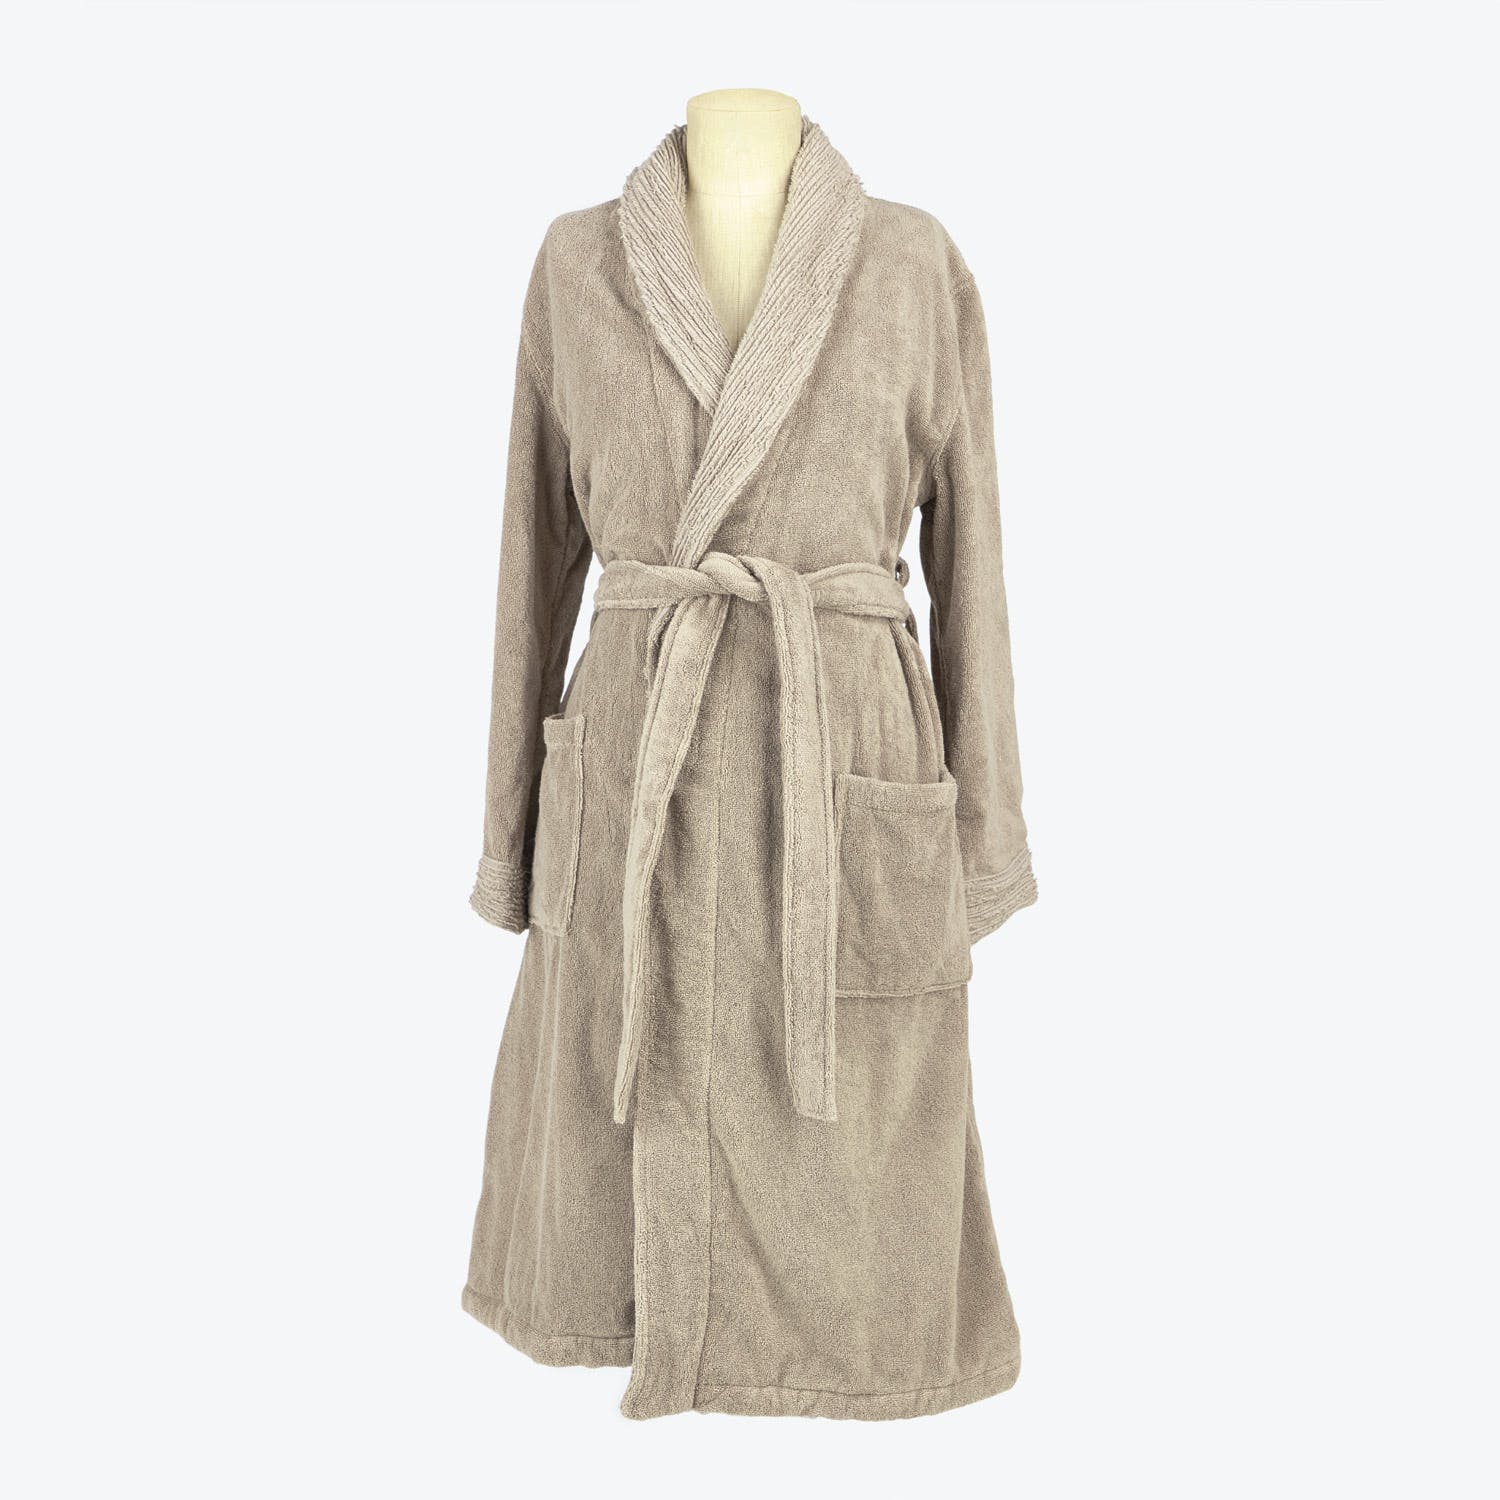 Beige terry cloth bathrobe with shawl collar and patch pockets.